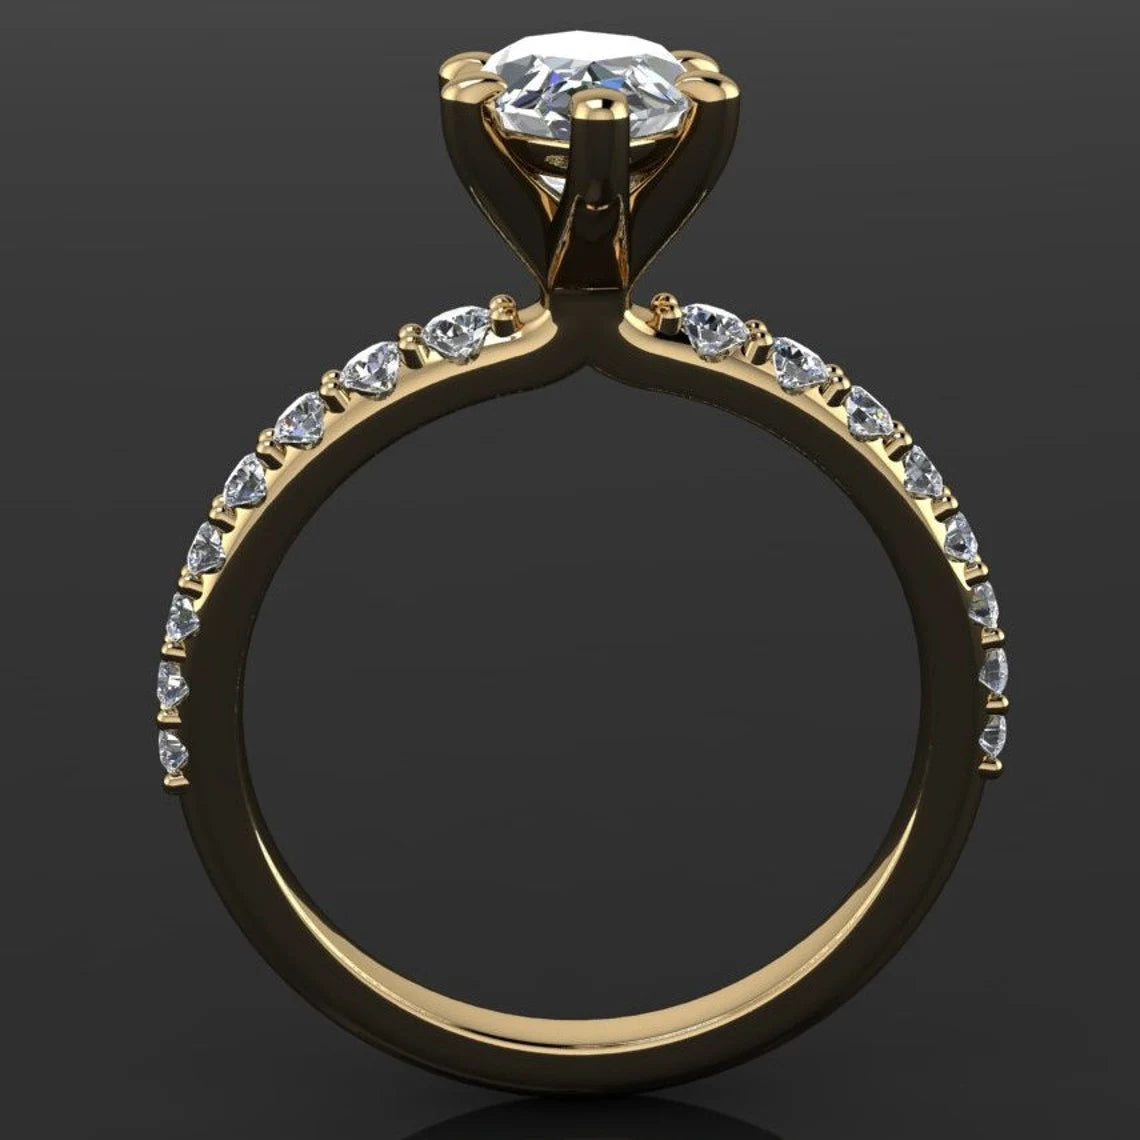 blaire ring - 1.5 carat marquise ZAYA moissanite engagement ring, d color moissanite - J Hollywood Designs